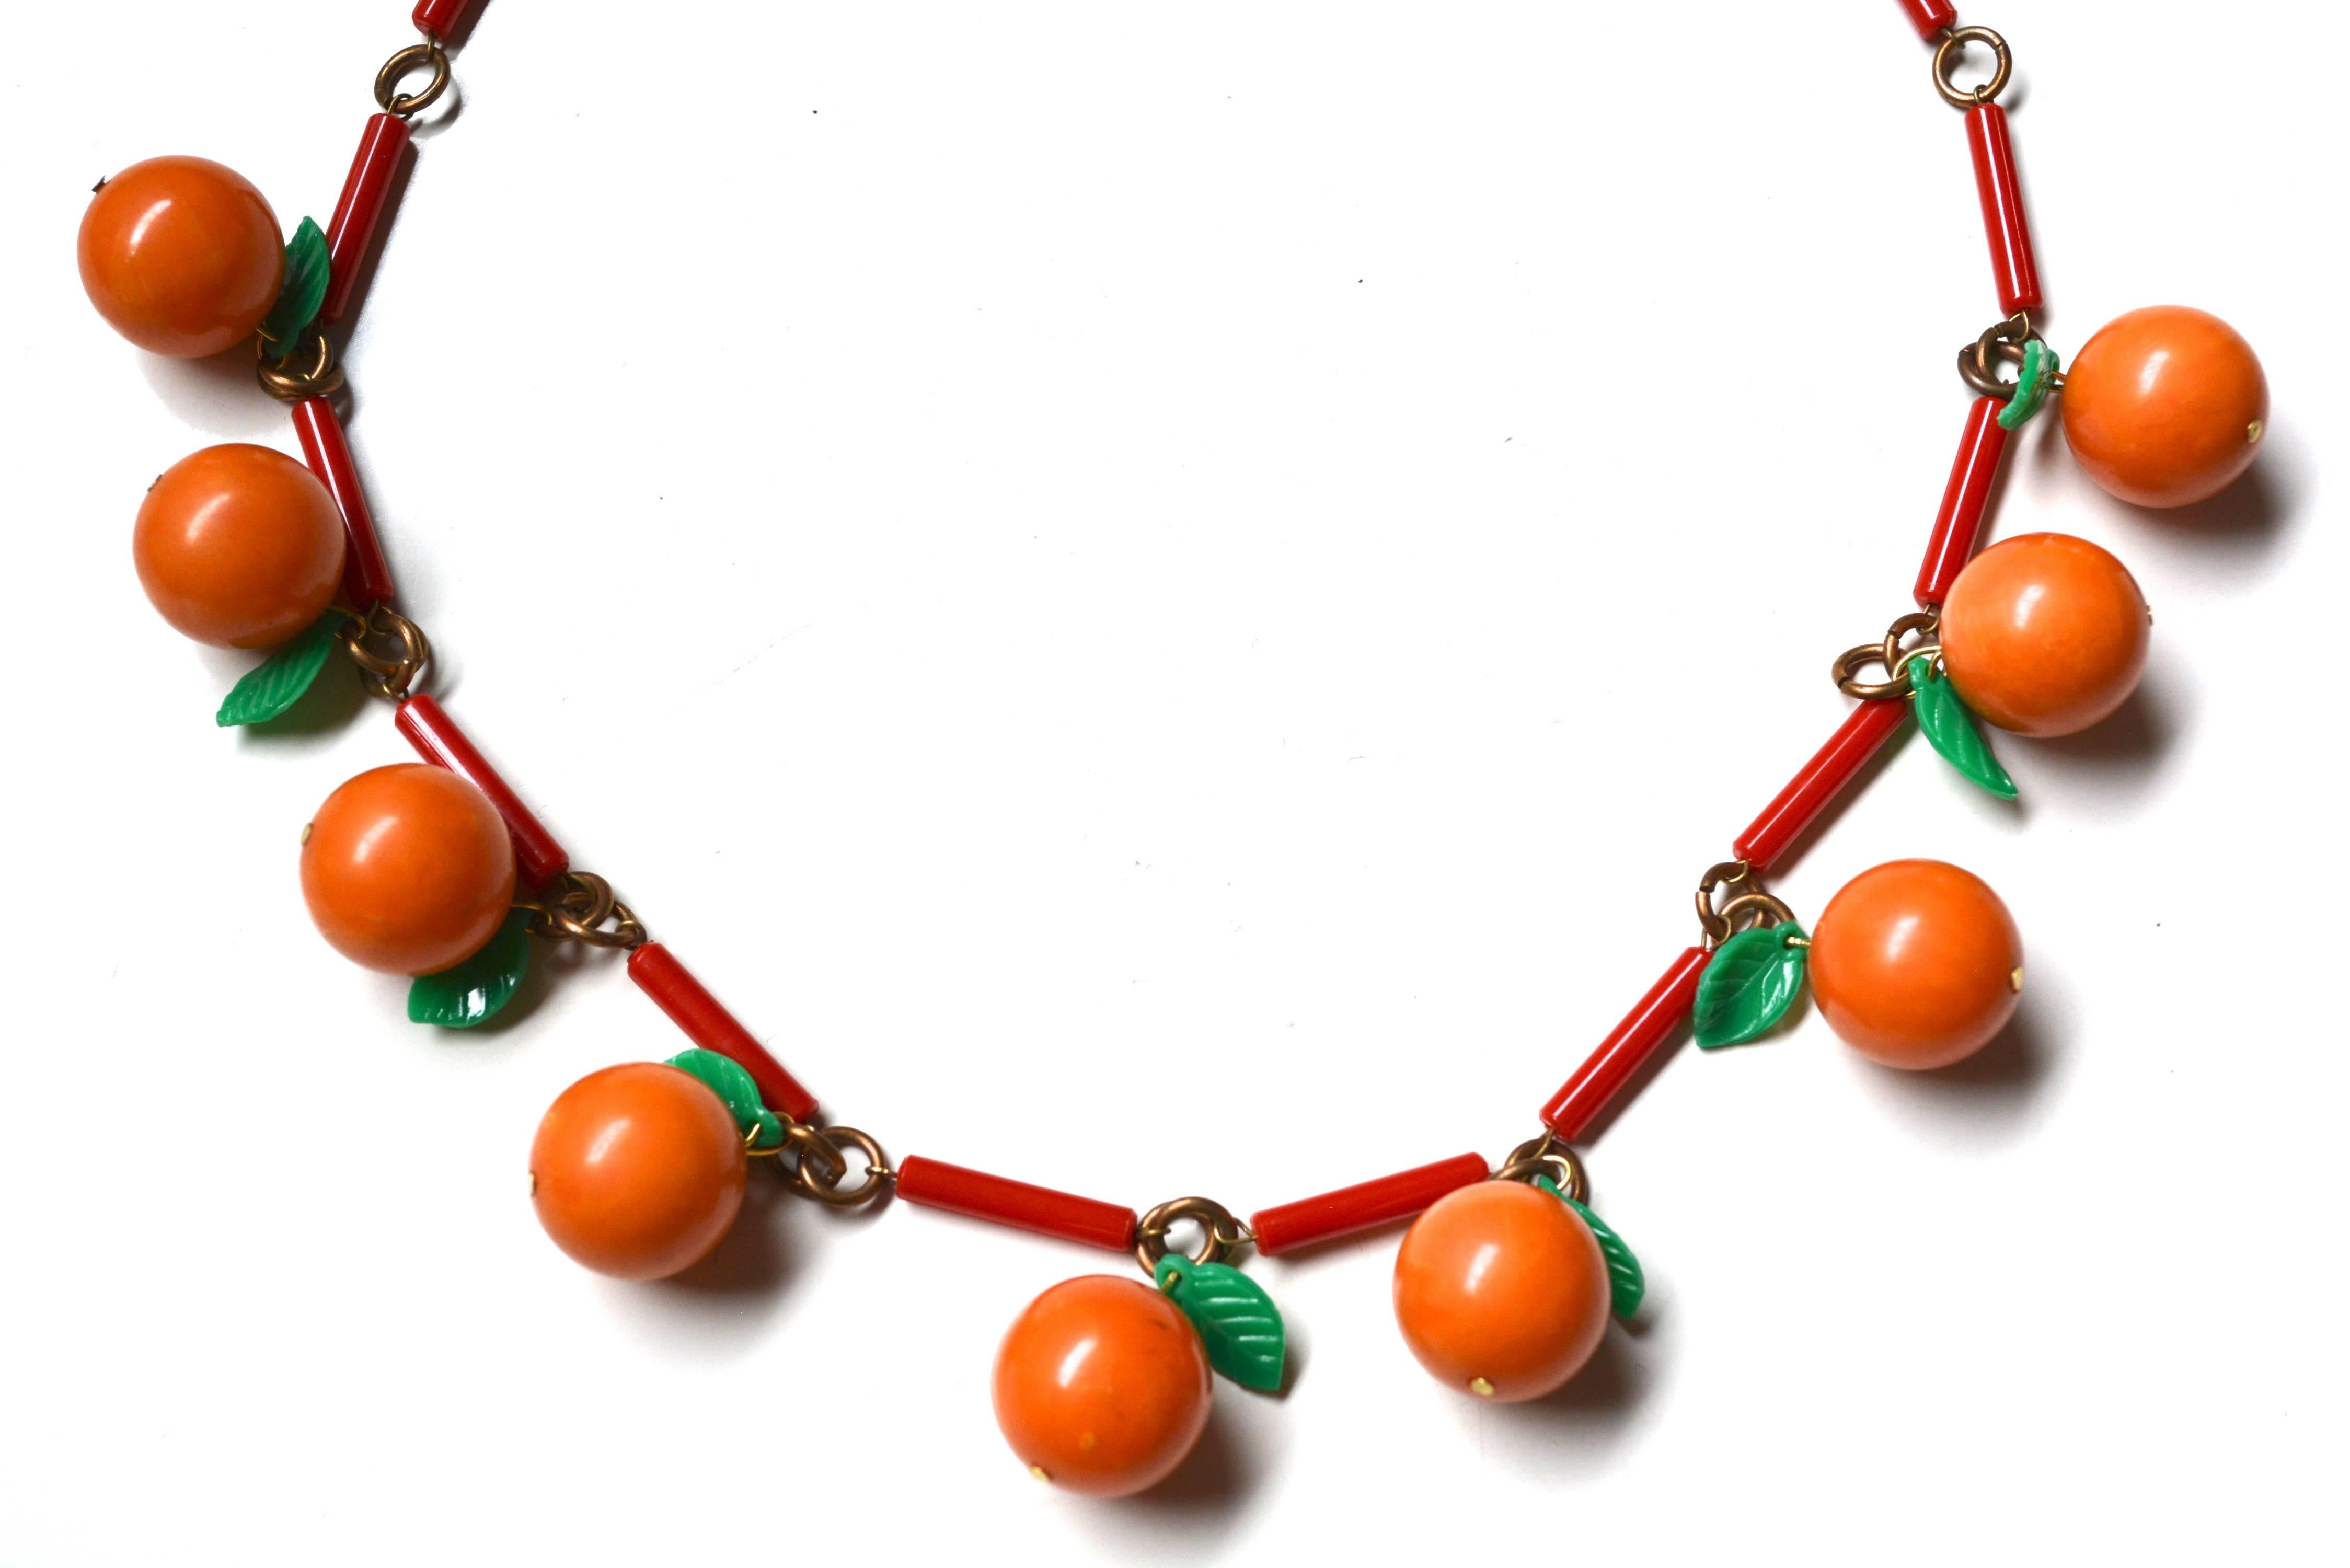 Hard to find bakelite and celluloid oranges or orange cherries necklace. Unsigned. Oranges are a great swirl tone and tested bakelite. Each orange is round and about .80